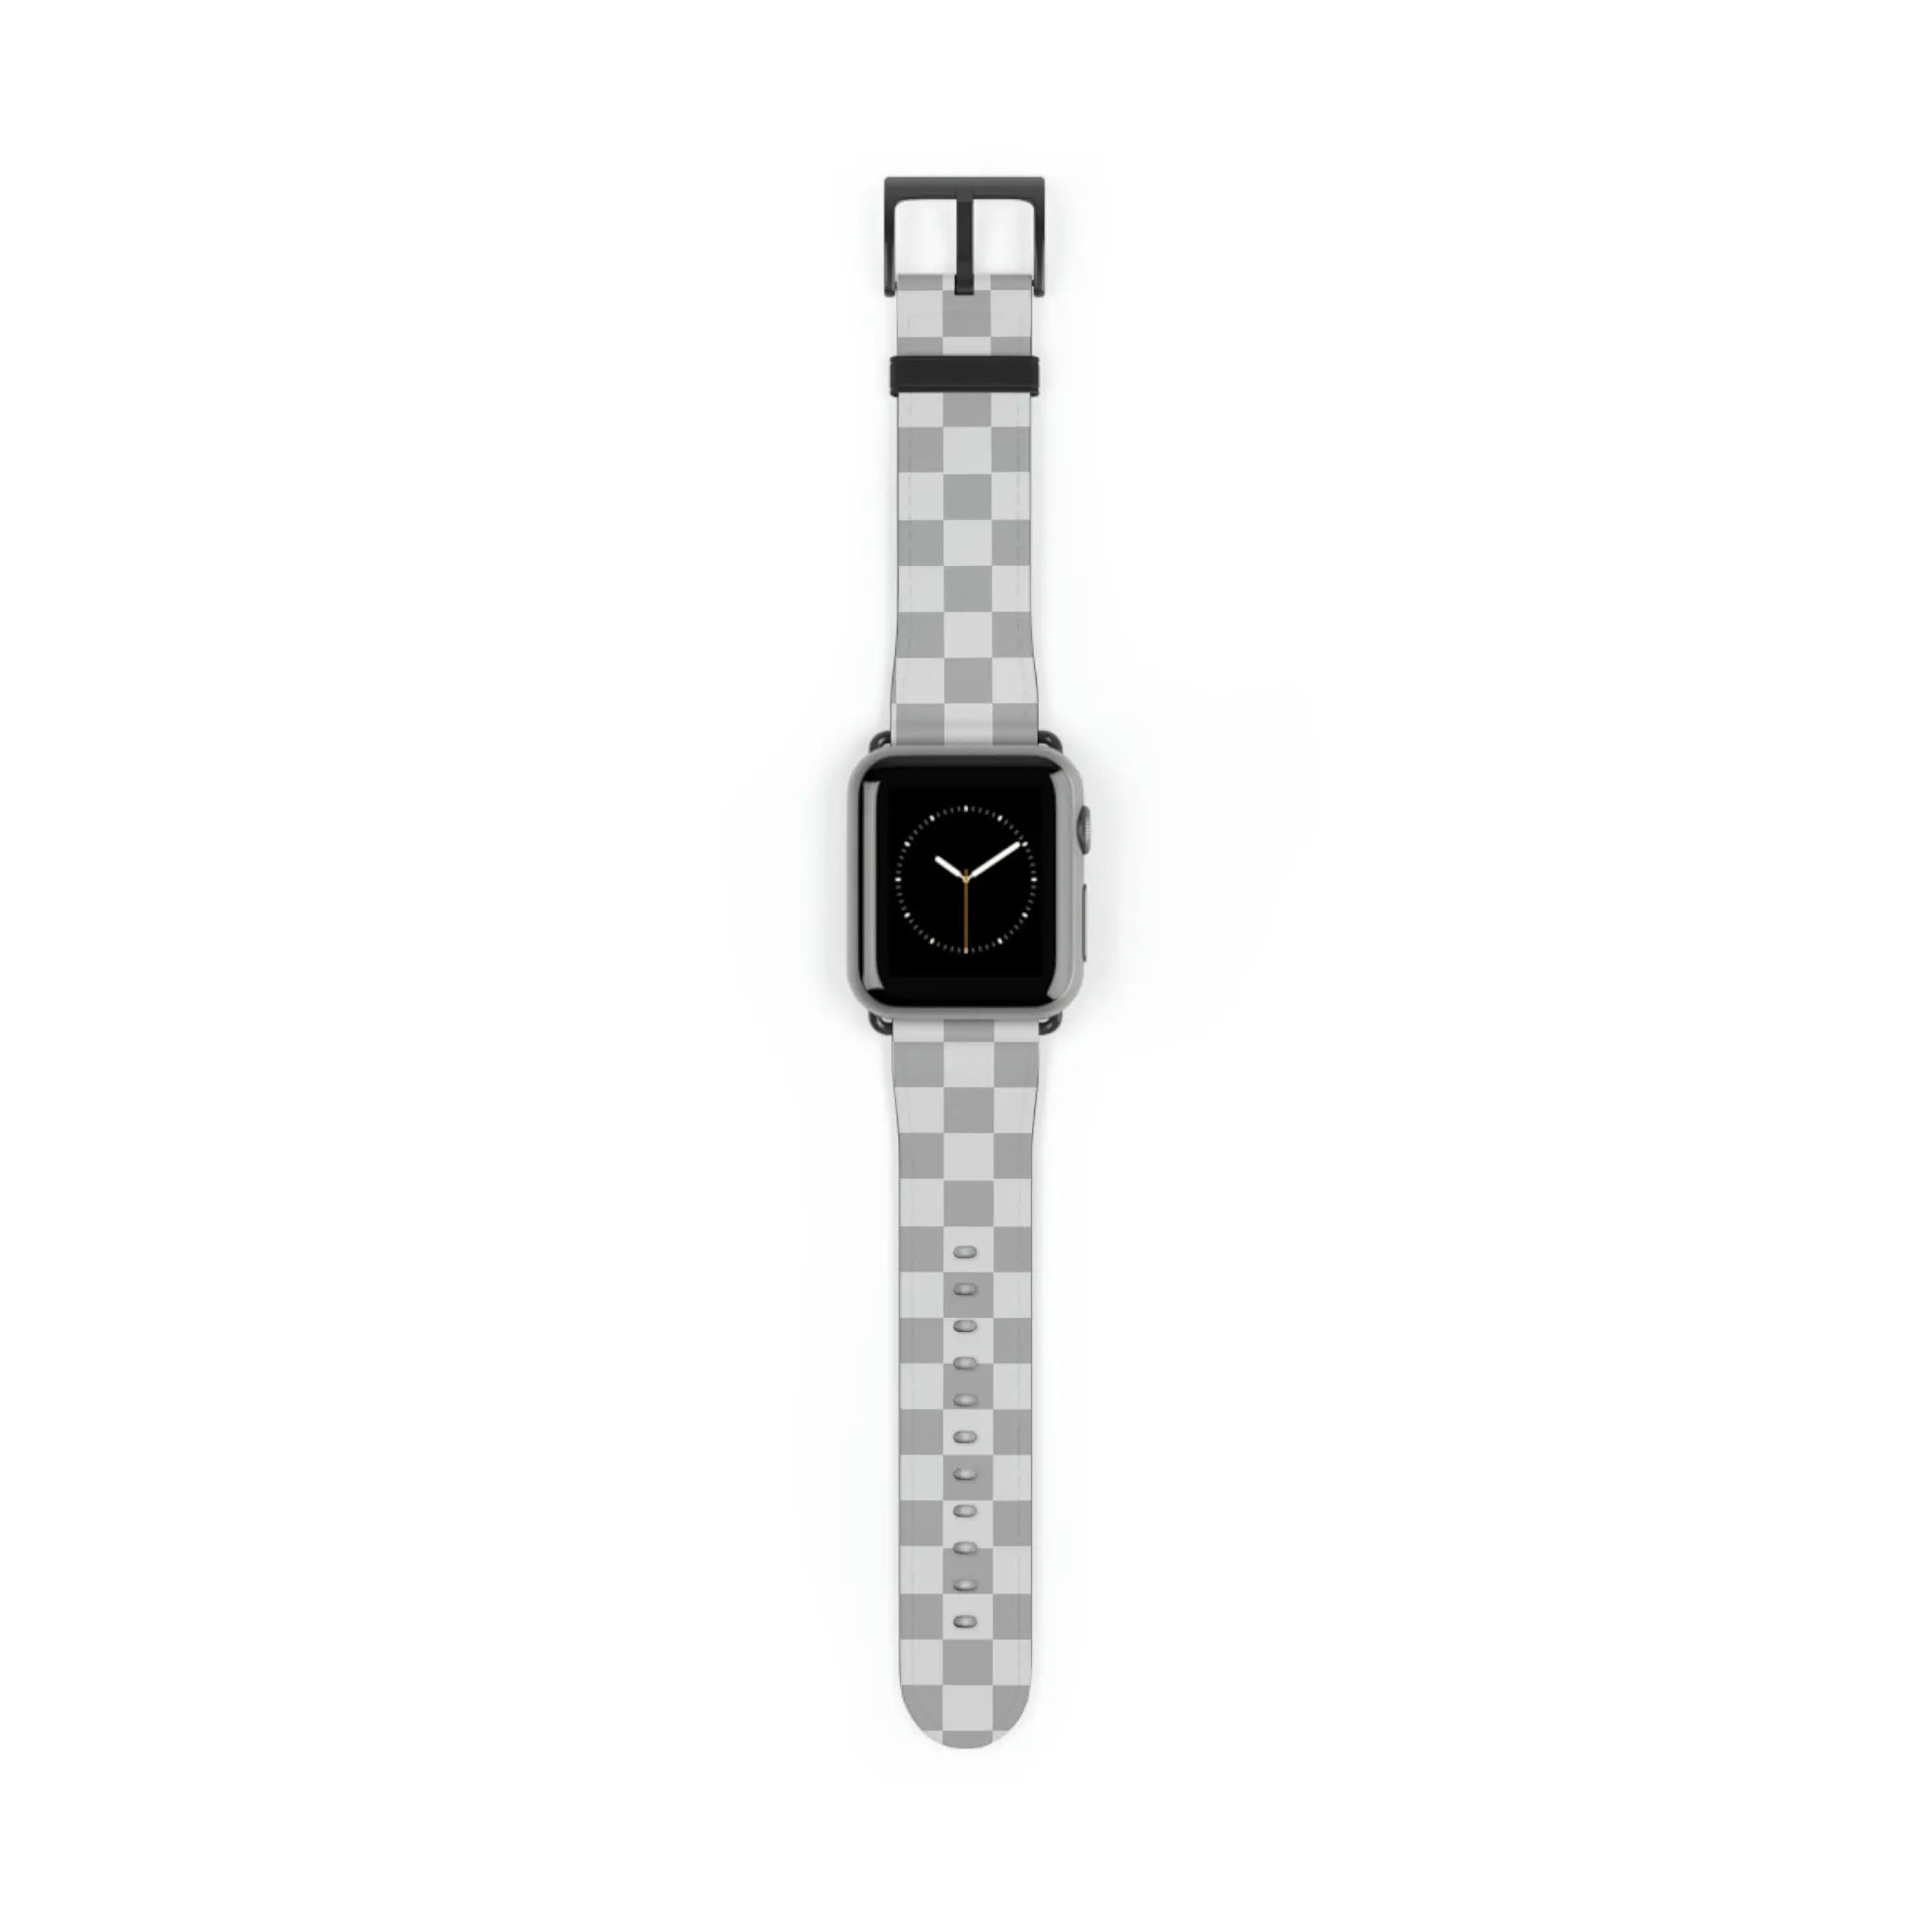  Designer Collection Check Mate (Grey) Watch Band for Apple Watch Watch Bands38-41mmBlackMatte